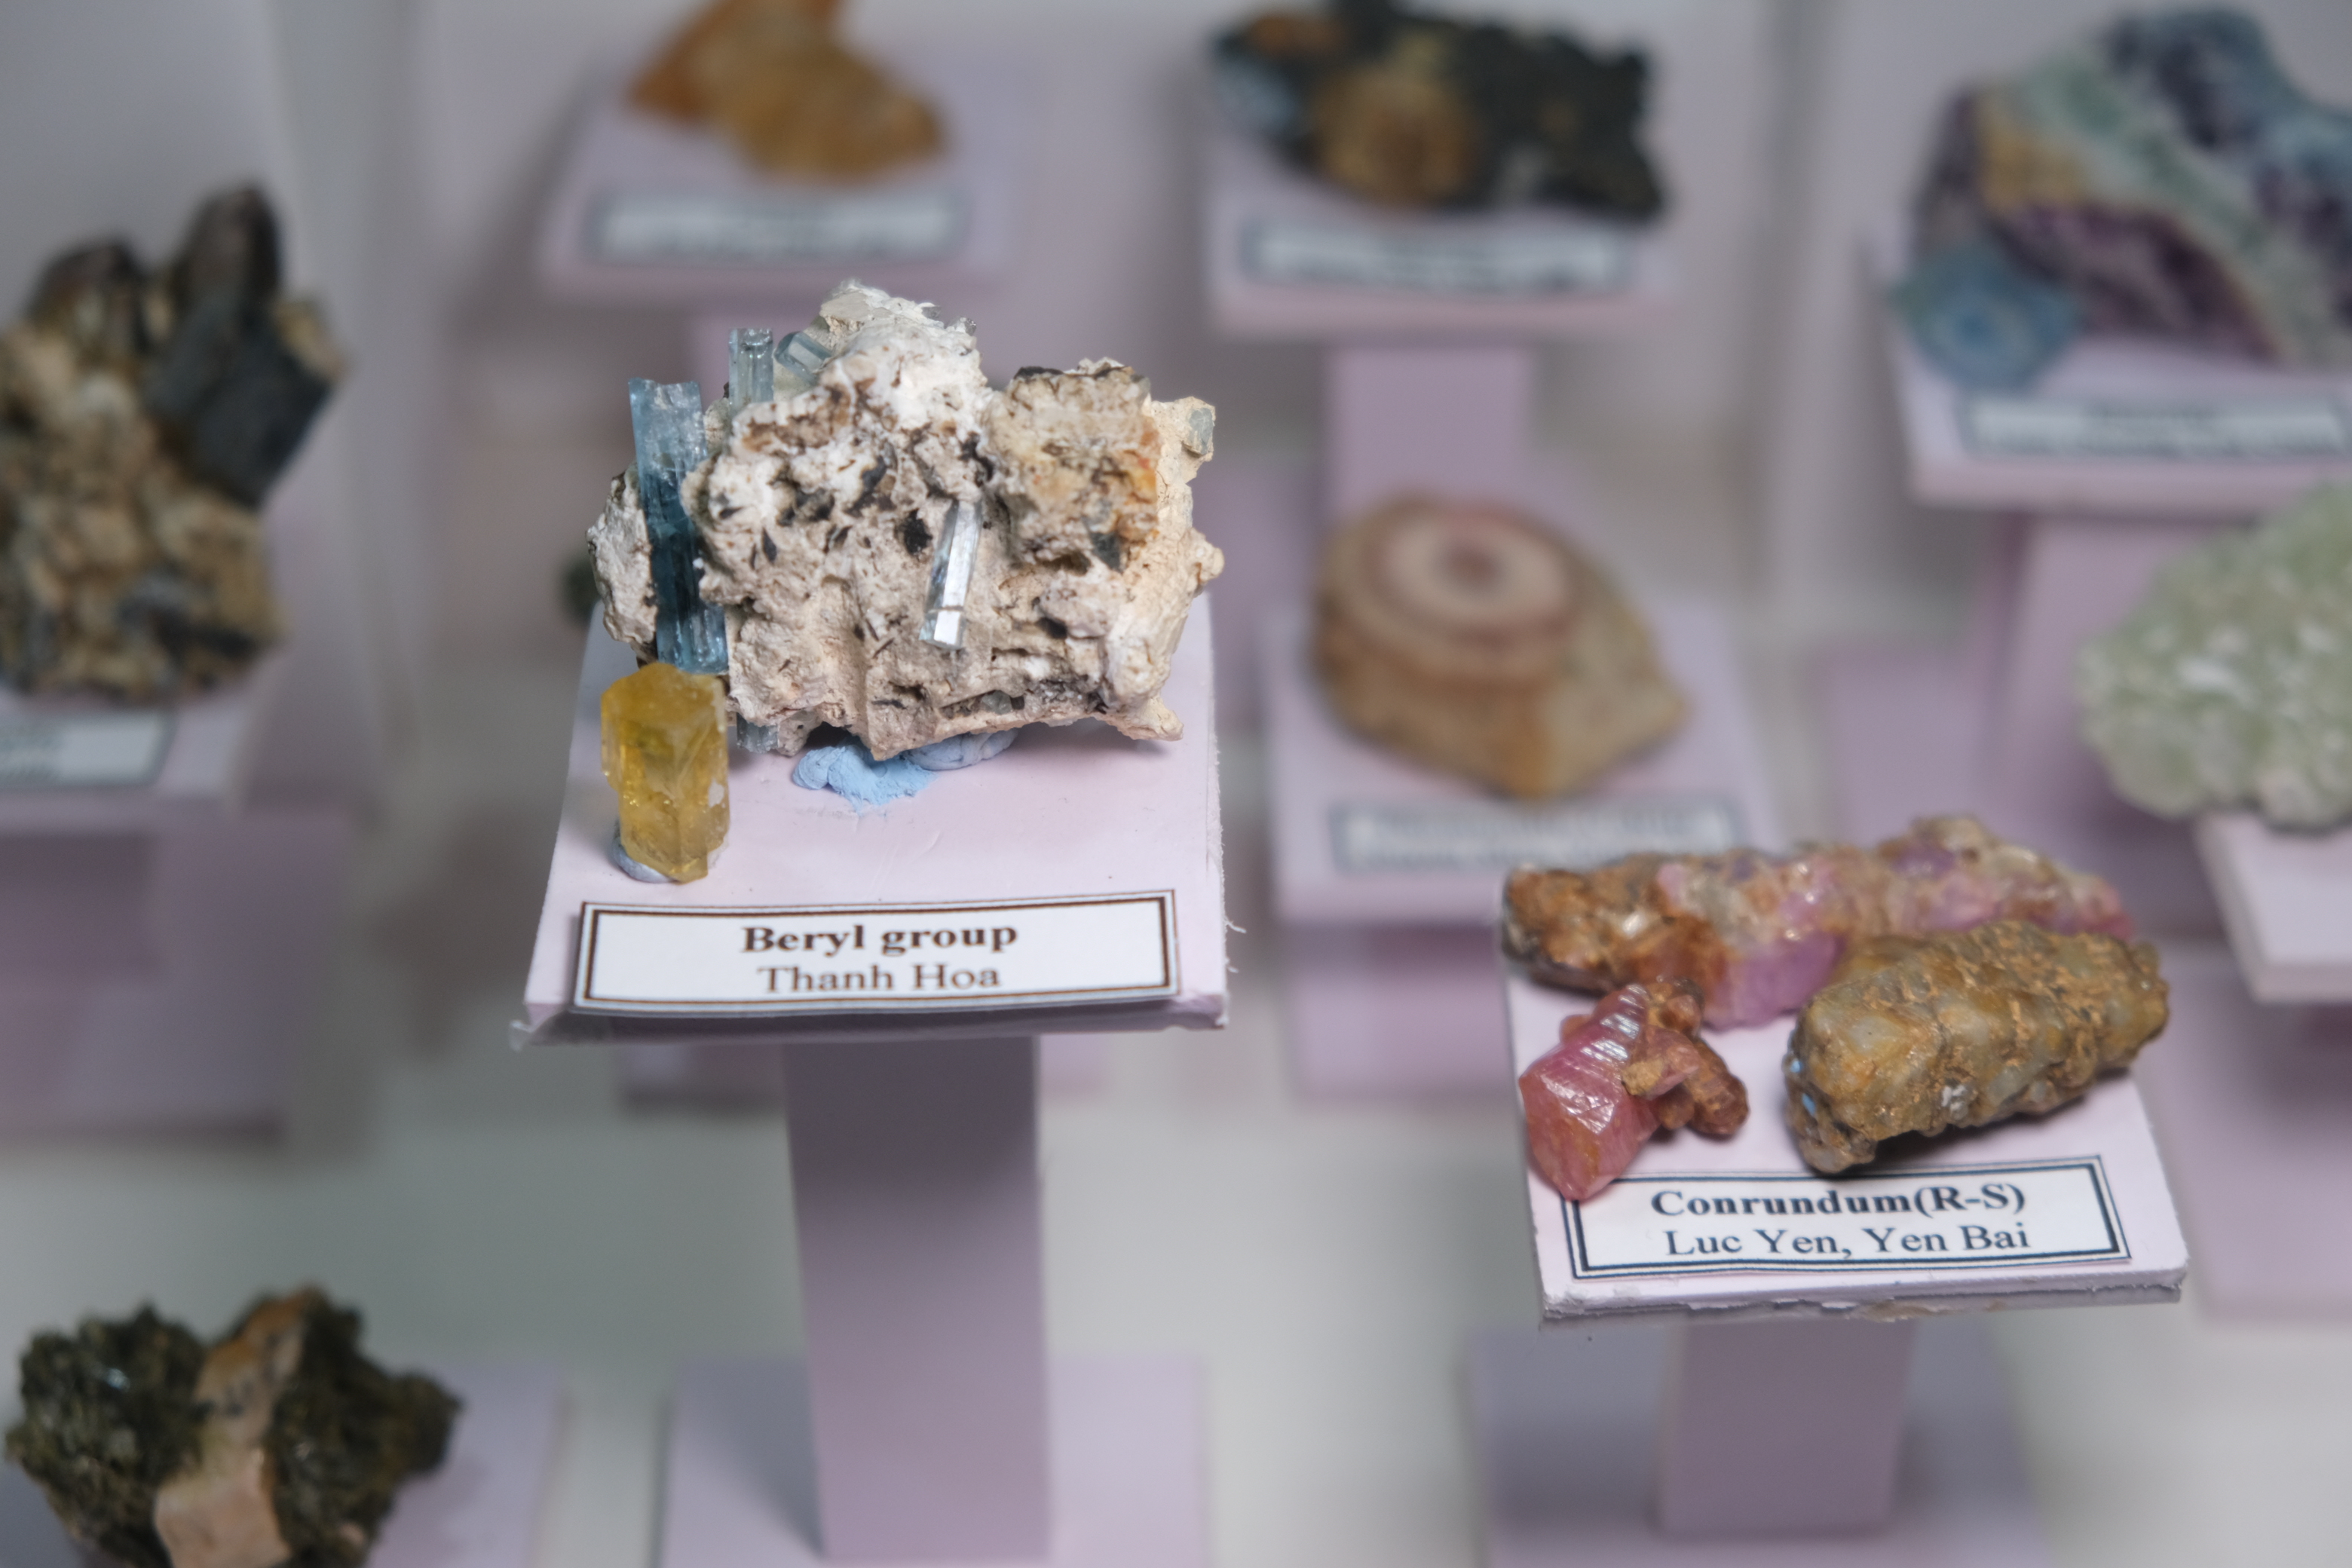 Natural crystals of Beryl and Corundum species are on display among others at Tuyen’s house in Ho Chi Minh City. Photo: Ngoc Phuong / Tuoi Tre News